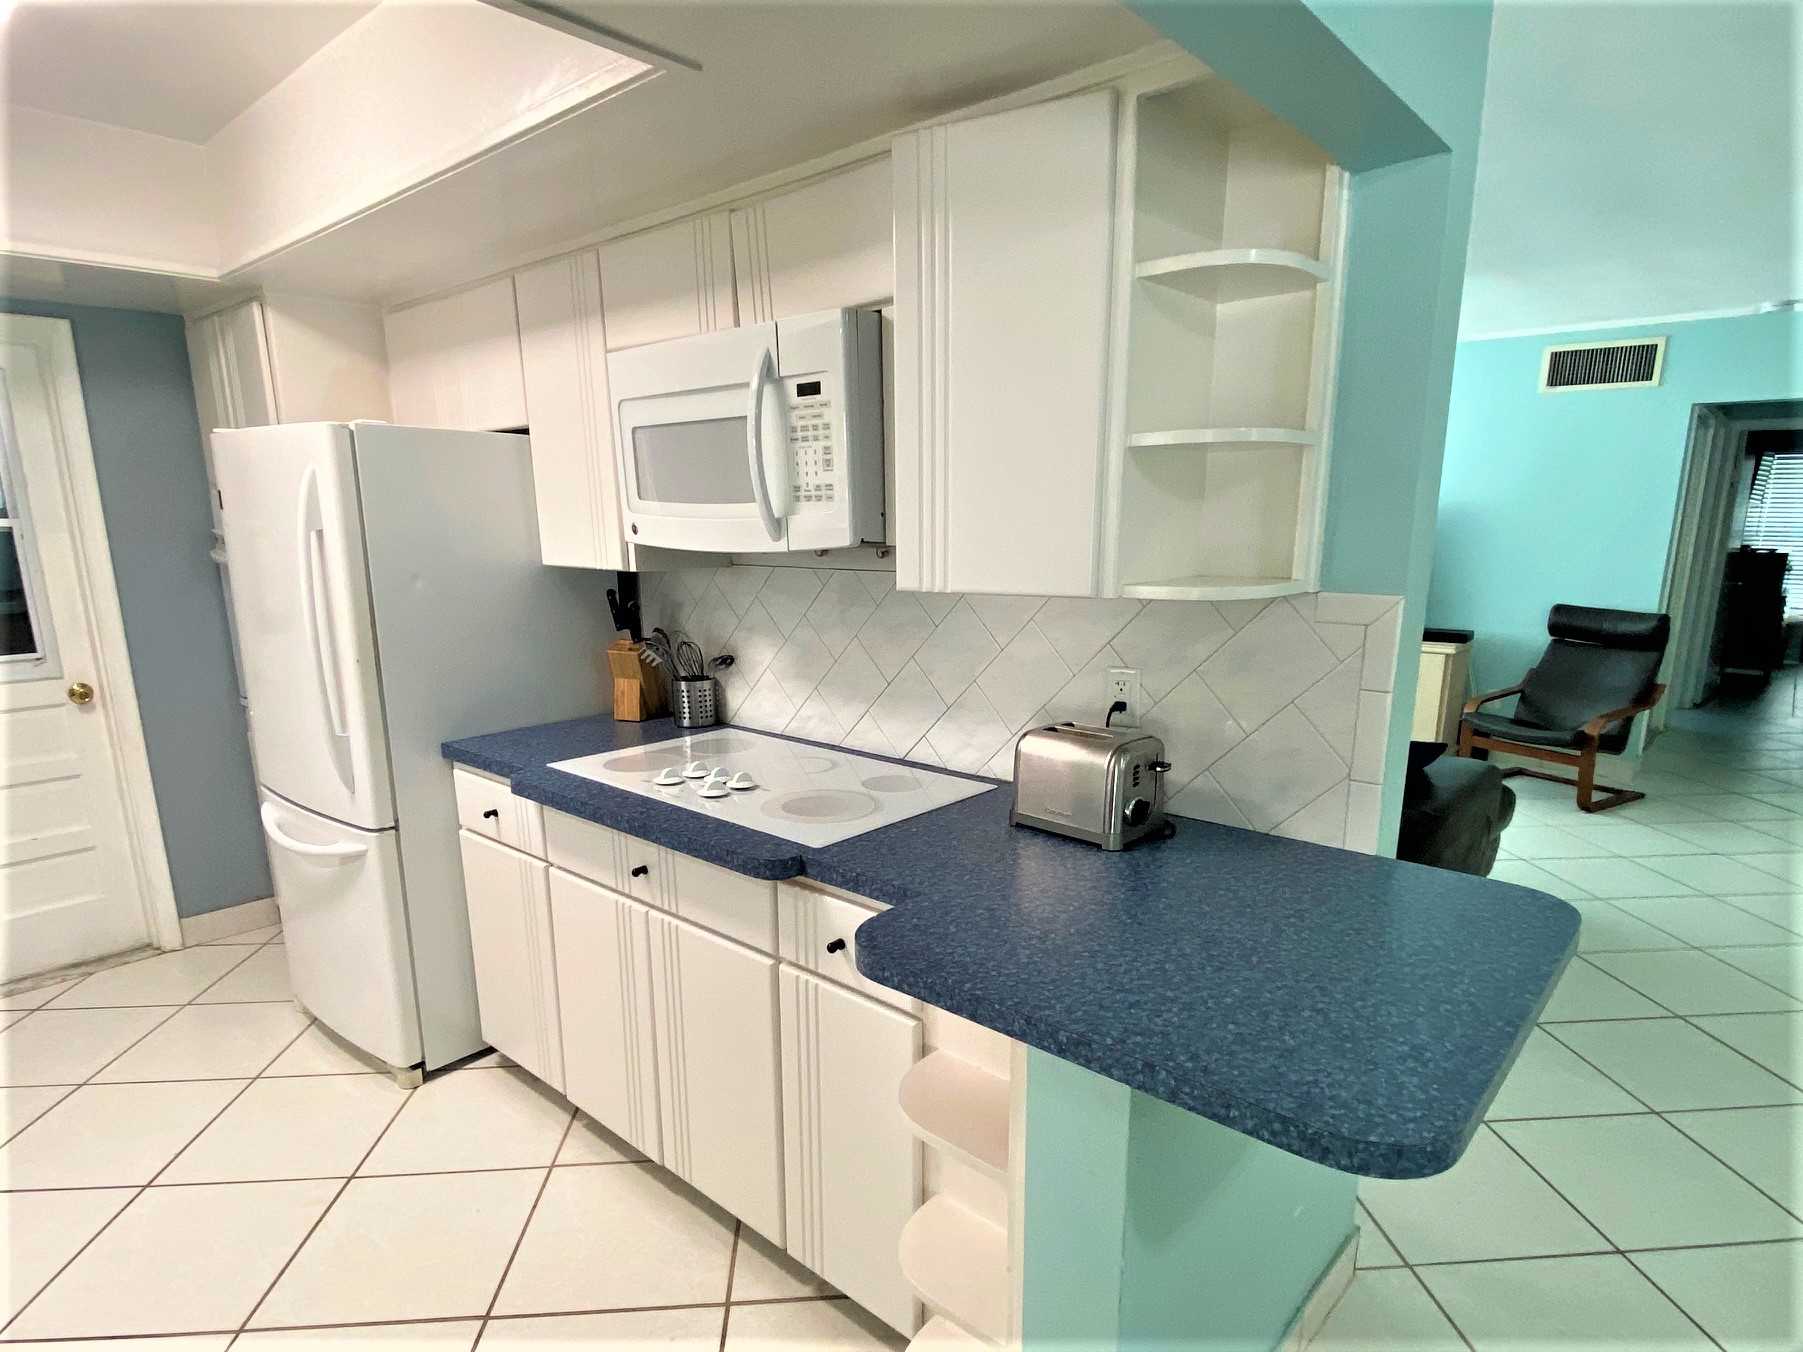 Kitchen has cooktop, microwave and conventional oven.